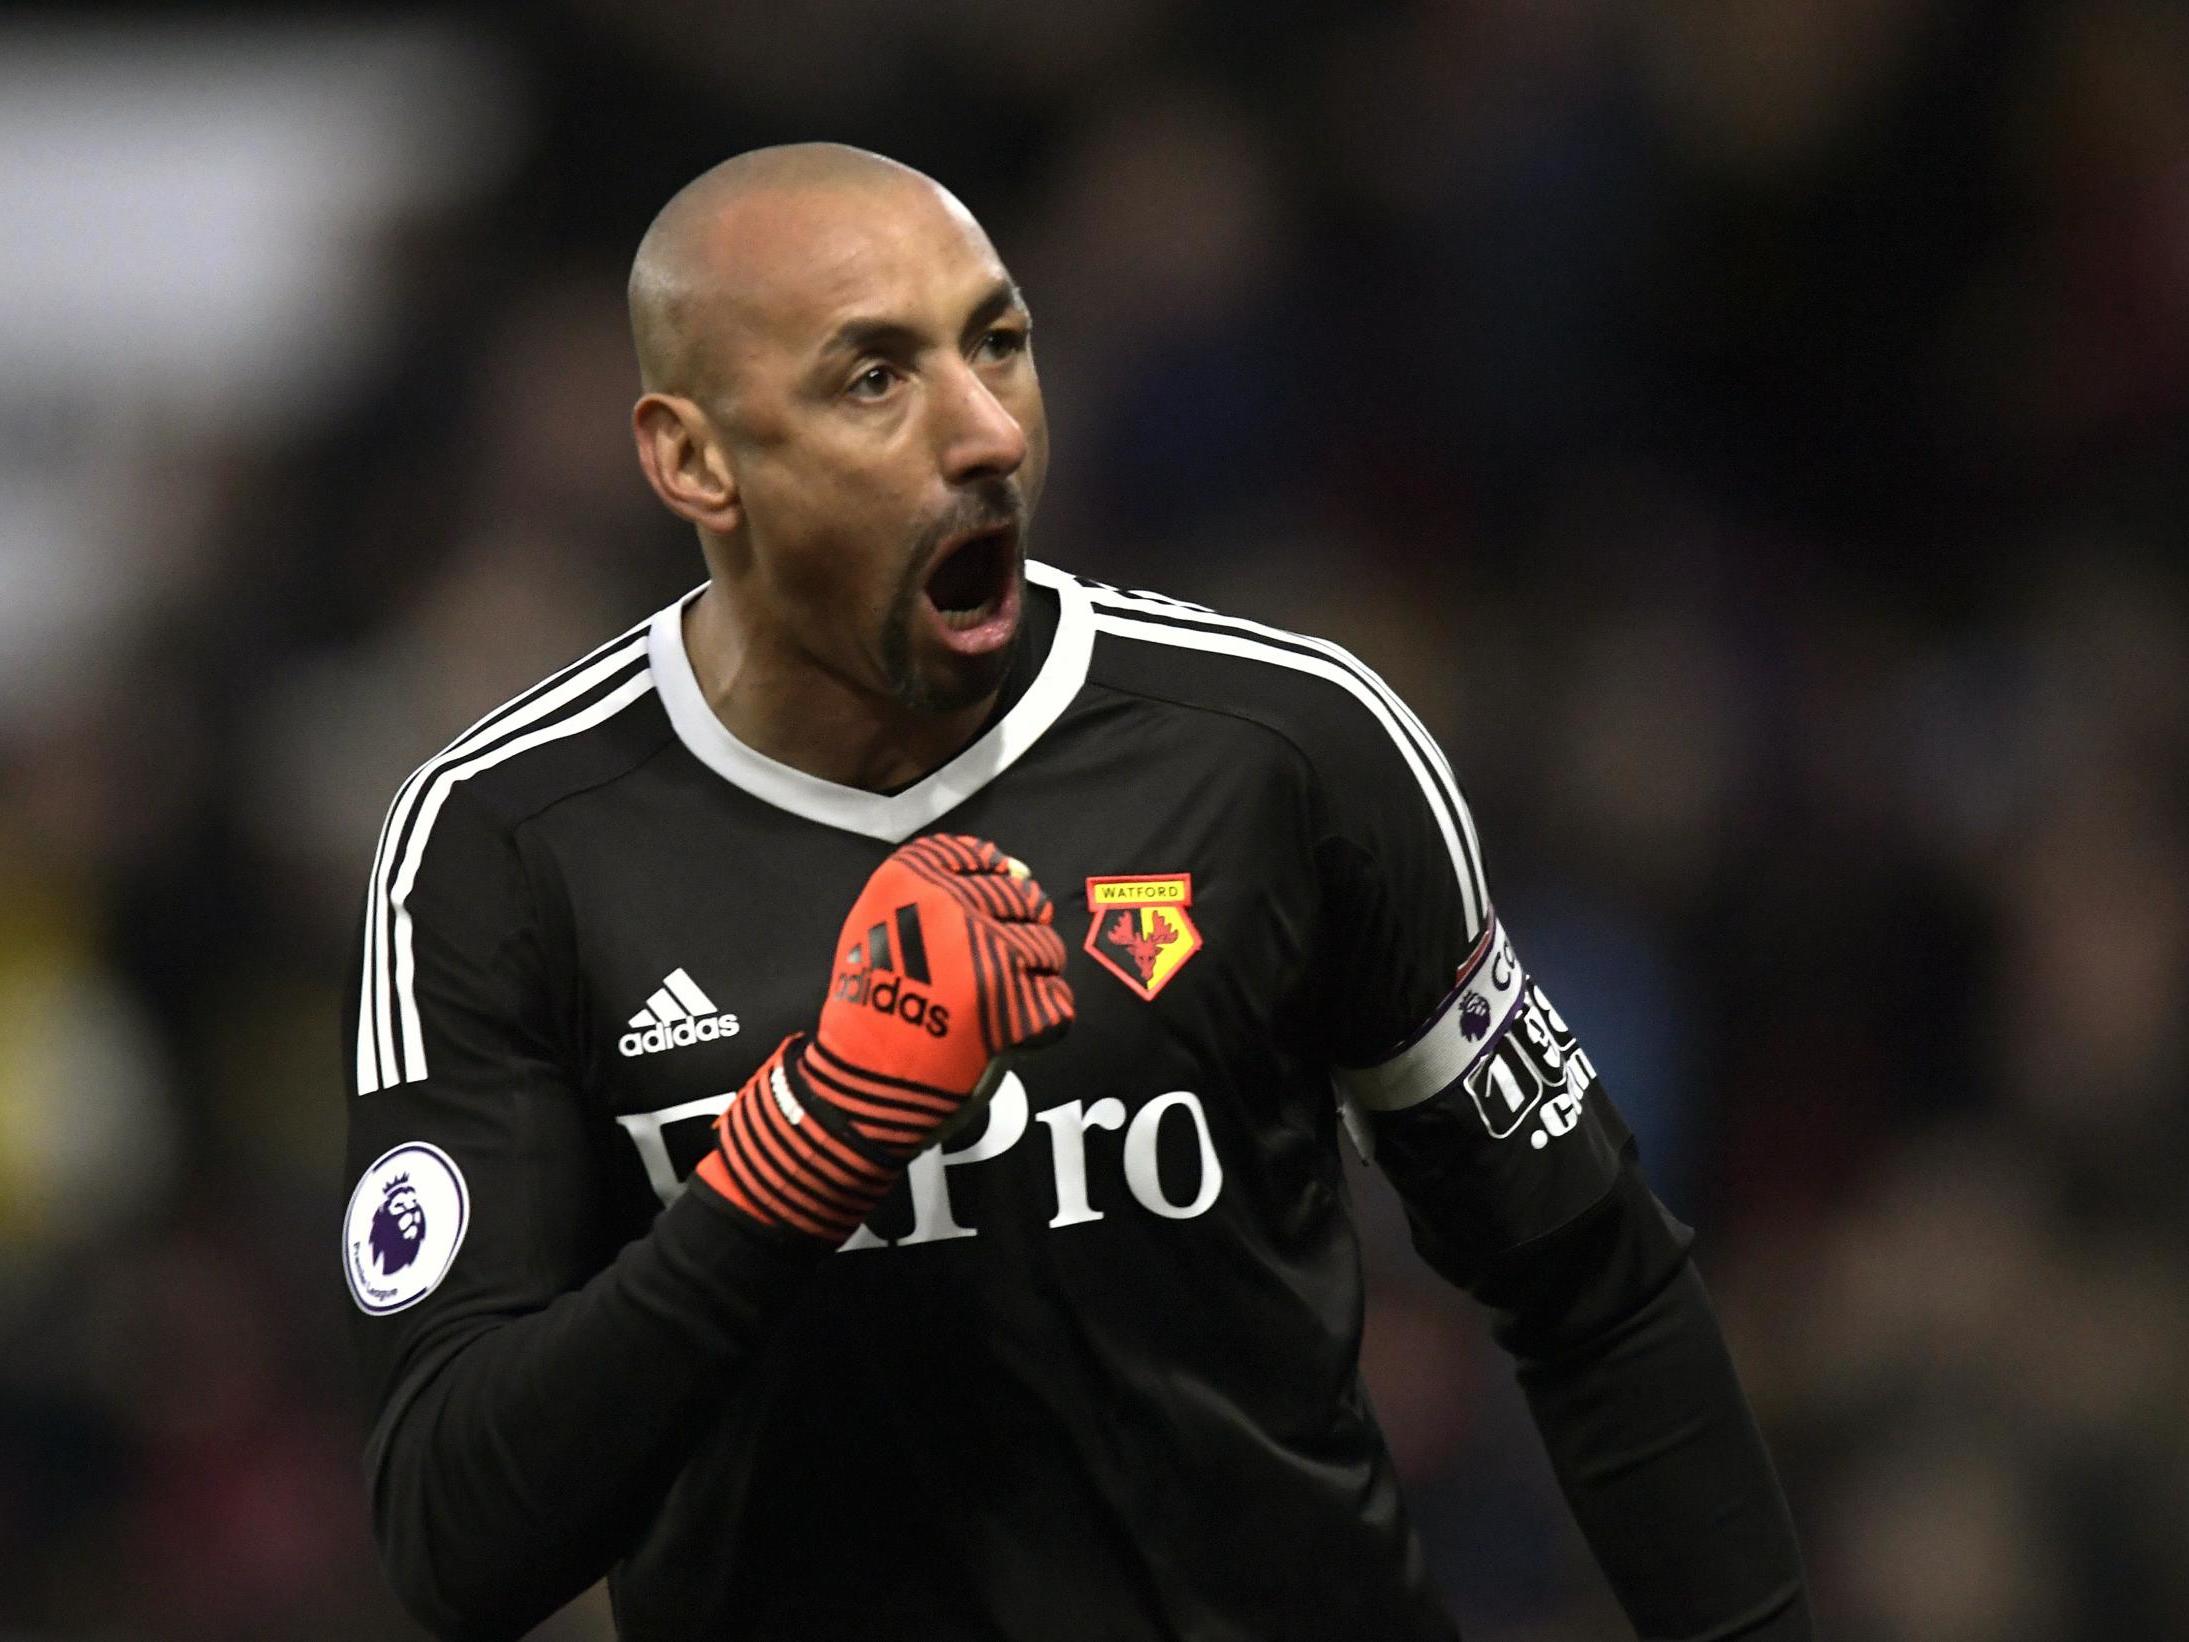 Heurelho Gomes will retire at the end of this season